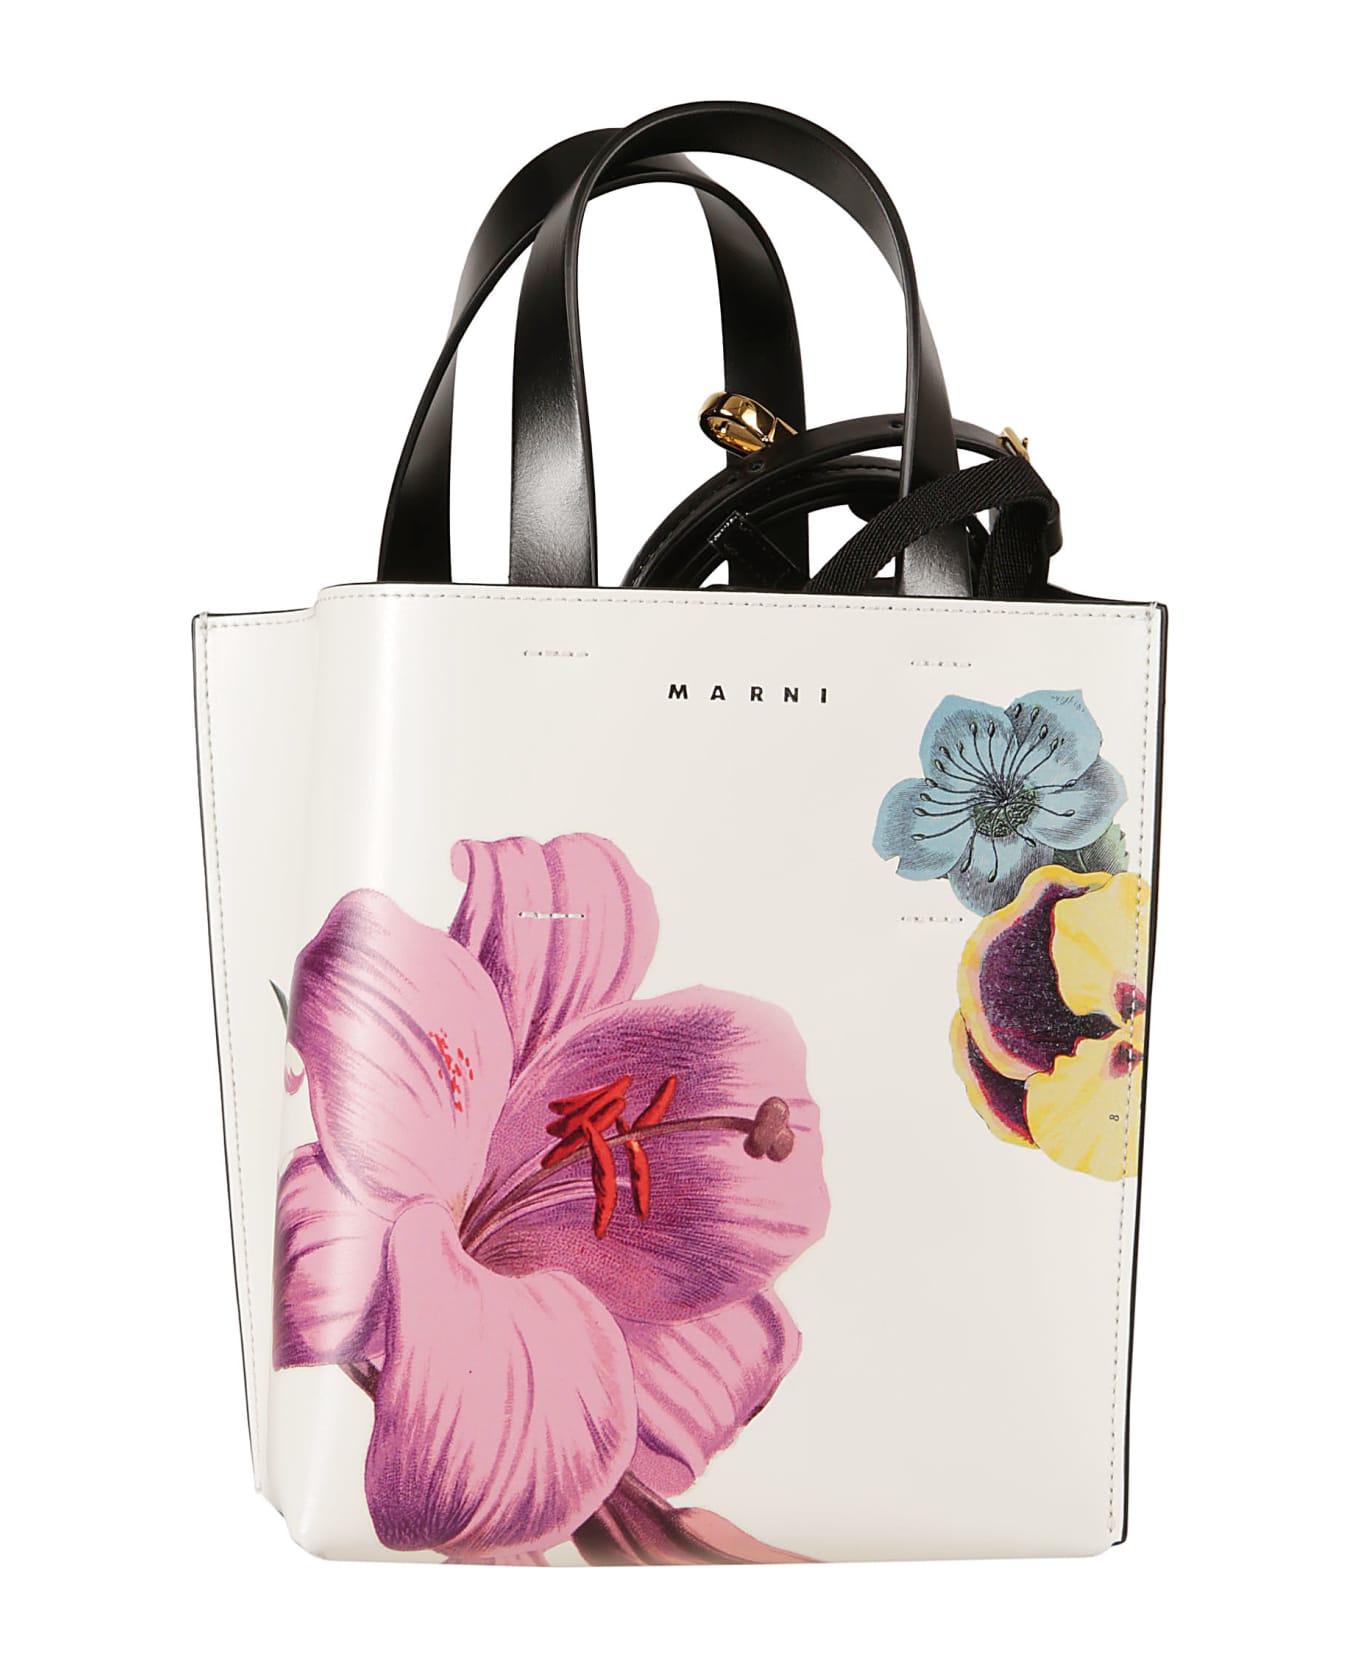 Marni Flower Print Tote - Lily White/Pink